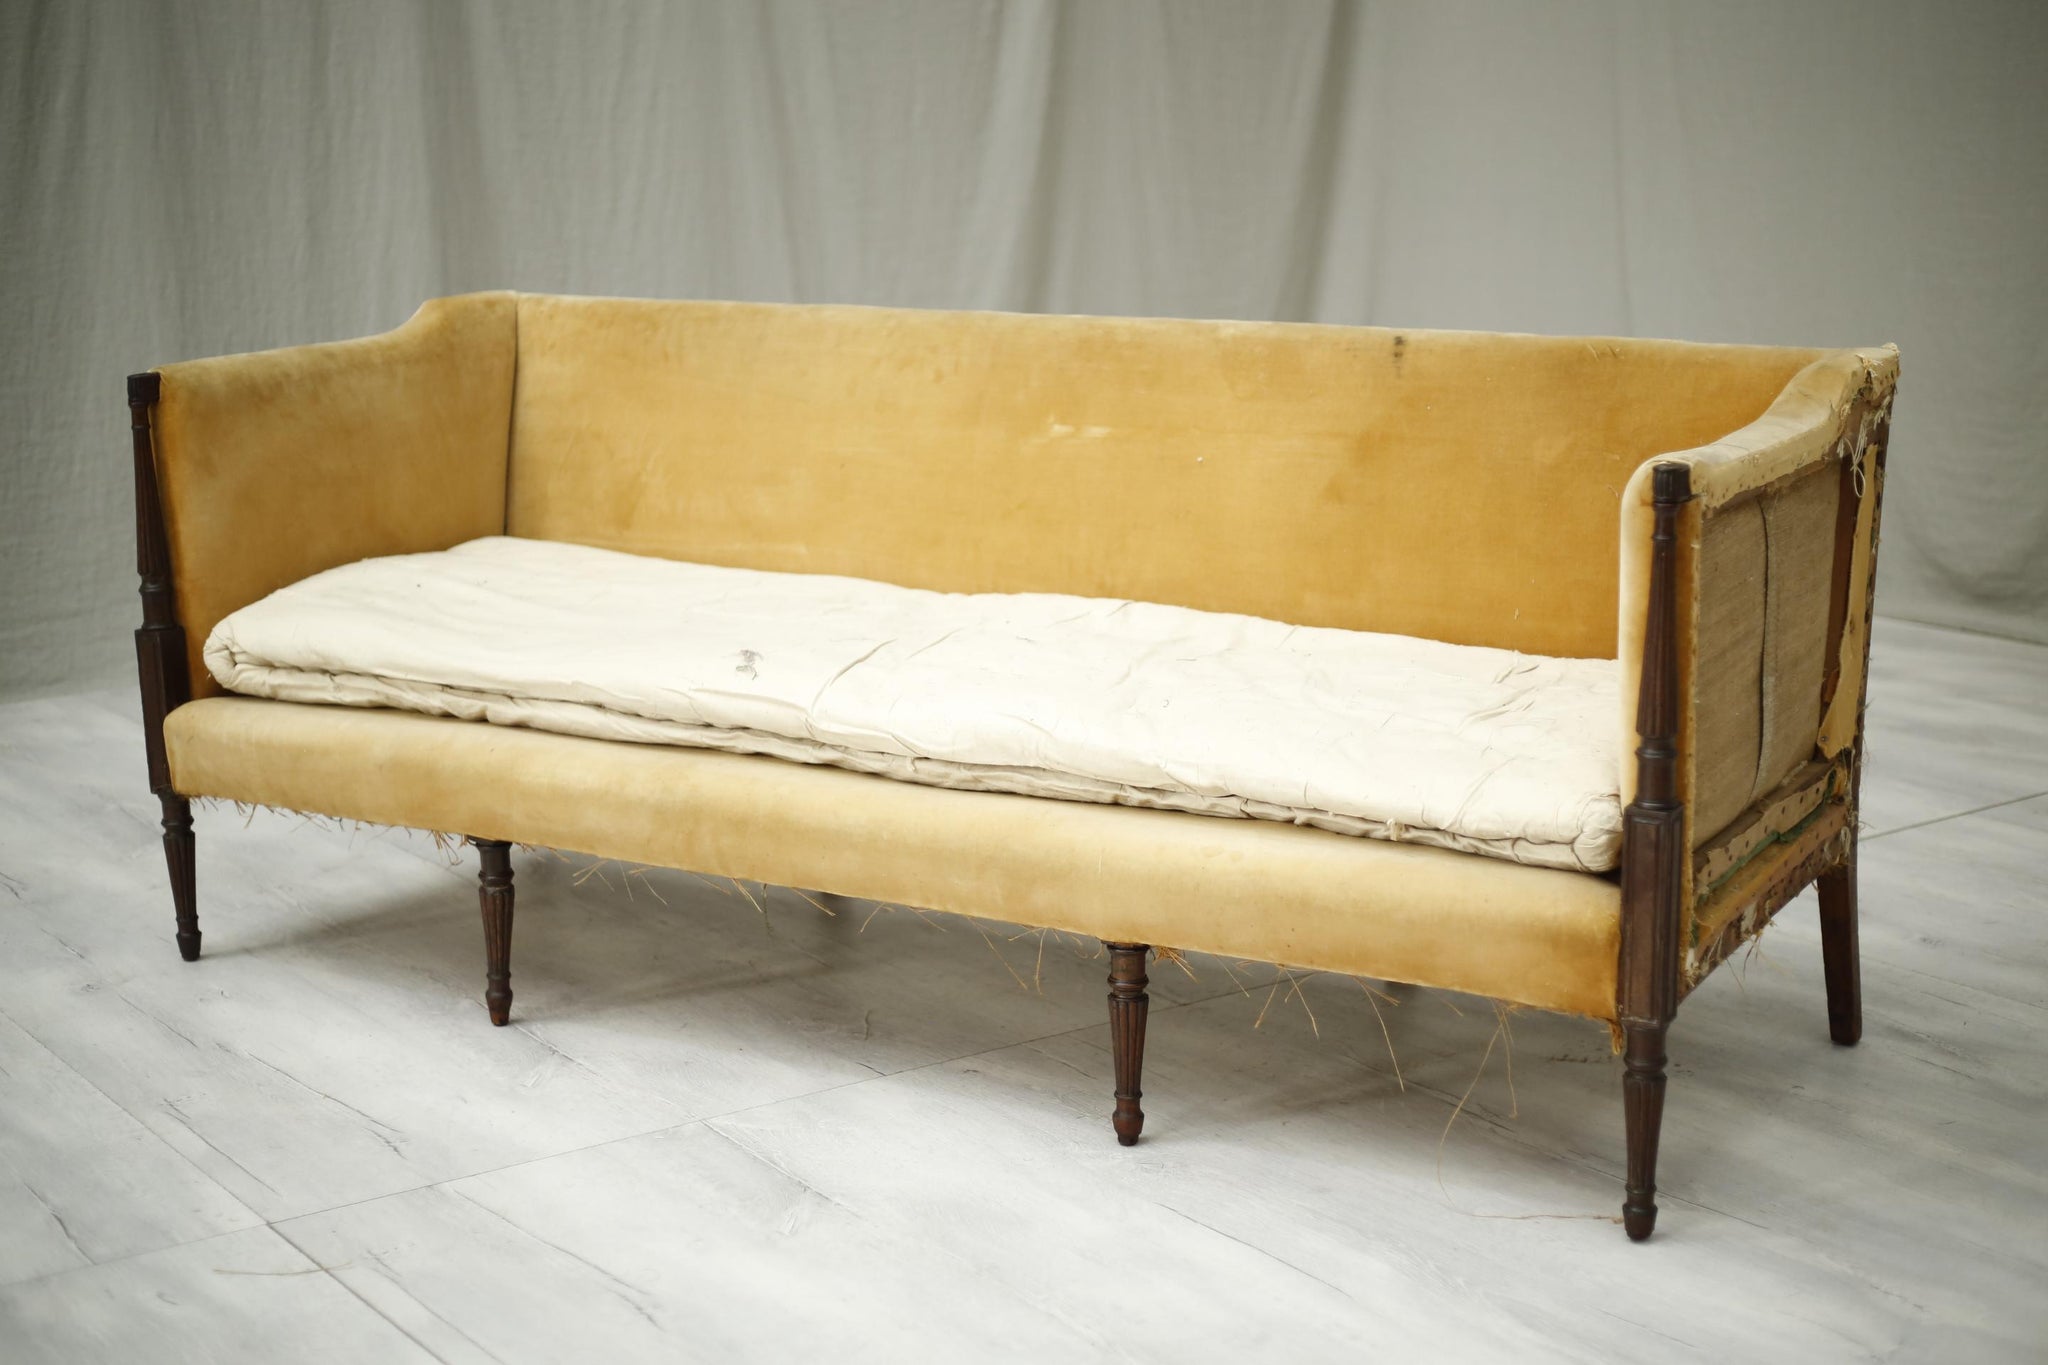 Regency period antique country house sofa - TallBoy Interiors